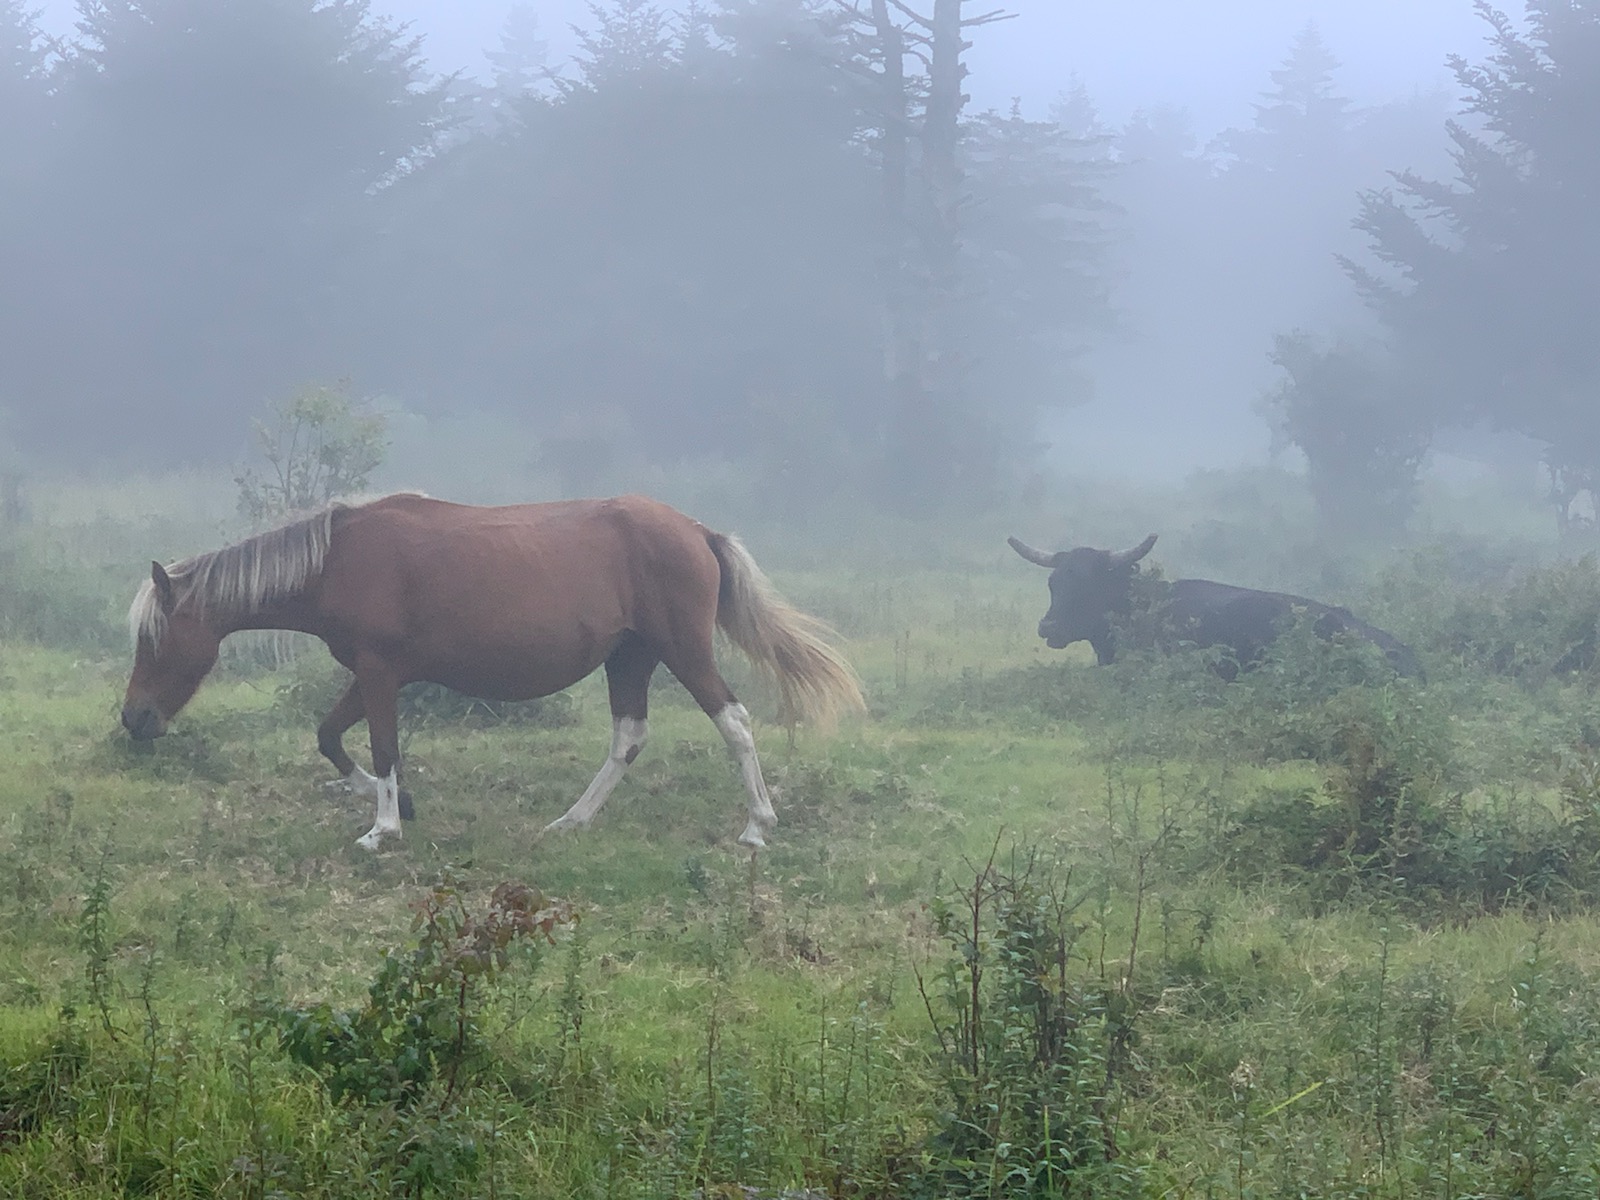 Adult pony and cattle in Grayson Highland State Park.